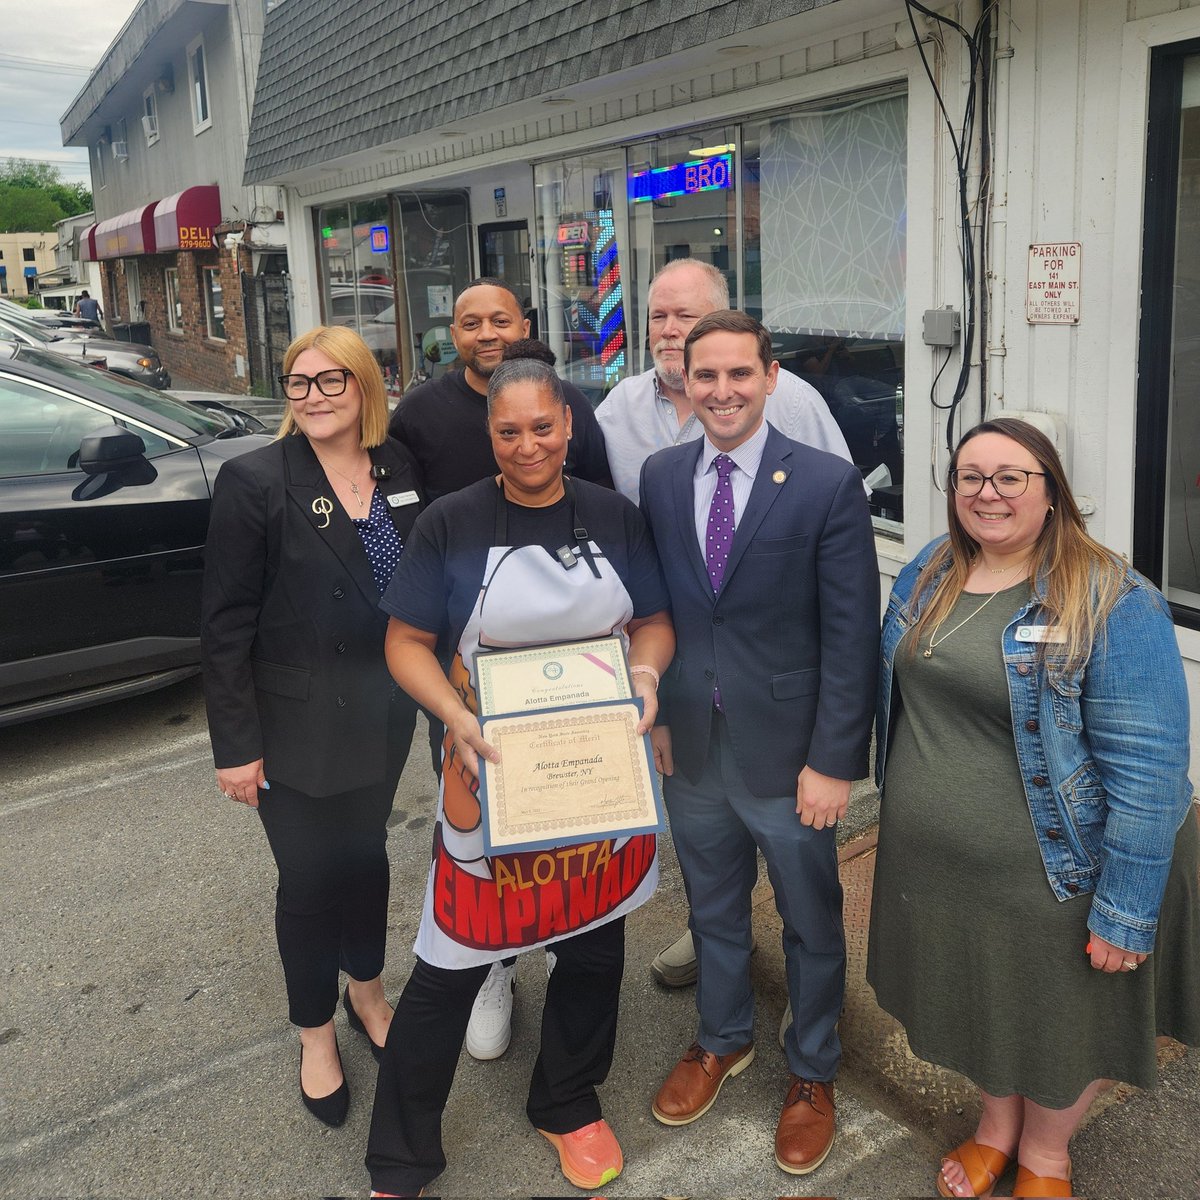 Thrilled to join Brewster Mayor Schoenig and members of the Brewster Chamber of Commerce to welcome Alotta Empanada to the community! Make sure you try their buffalo chicken empanada! #openforbusiness